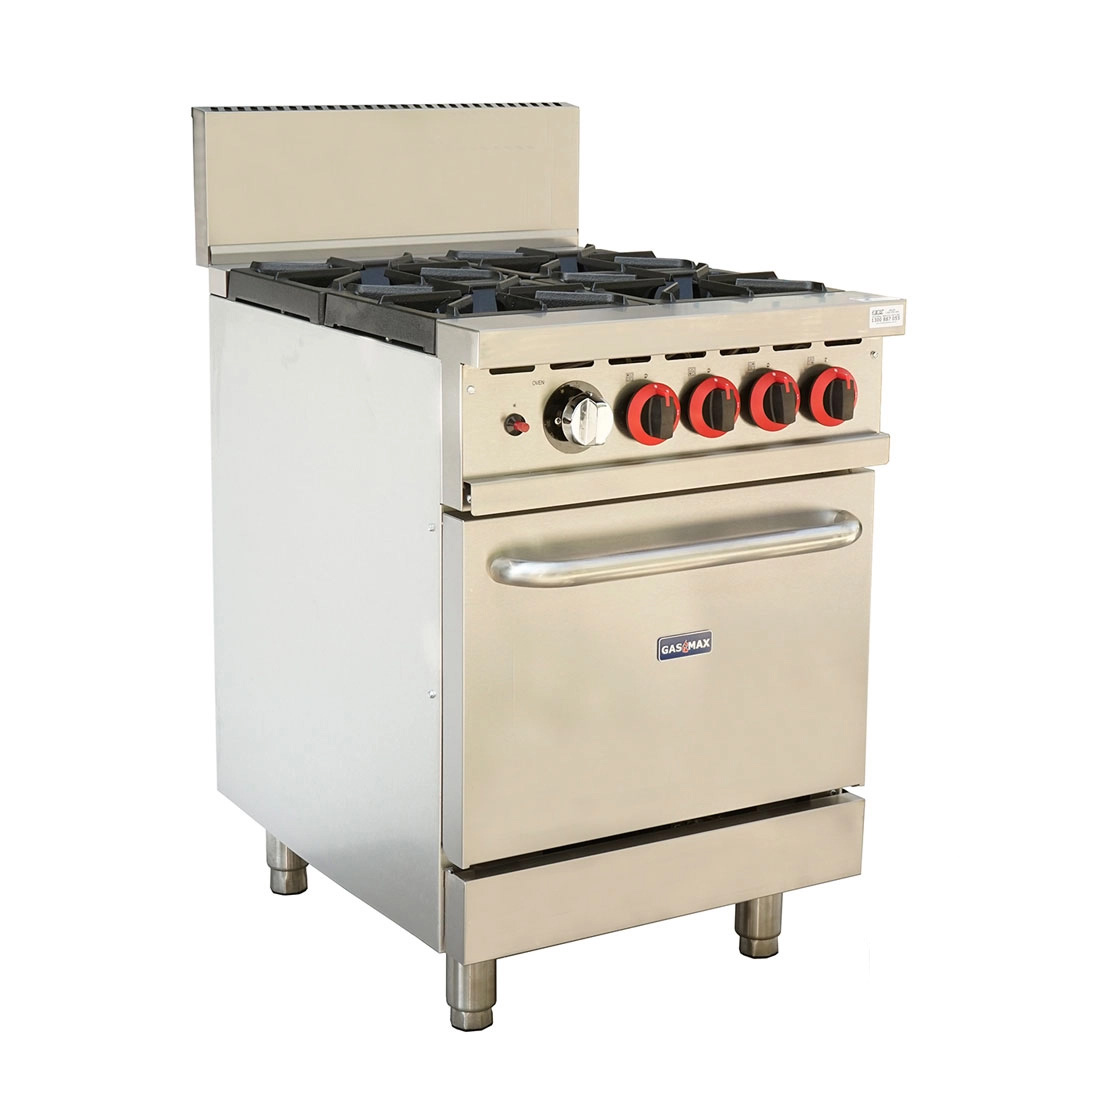 GBS4TLPG Gasmax 4 Burner With Oven Flame Failure